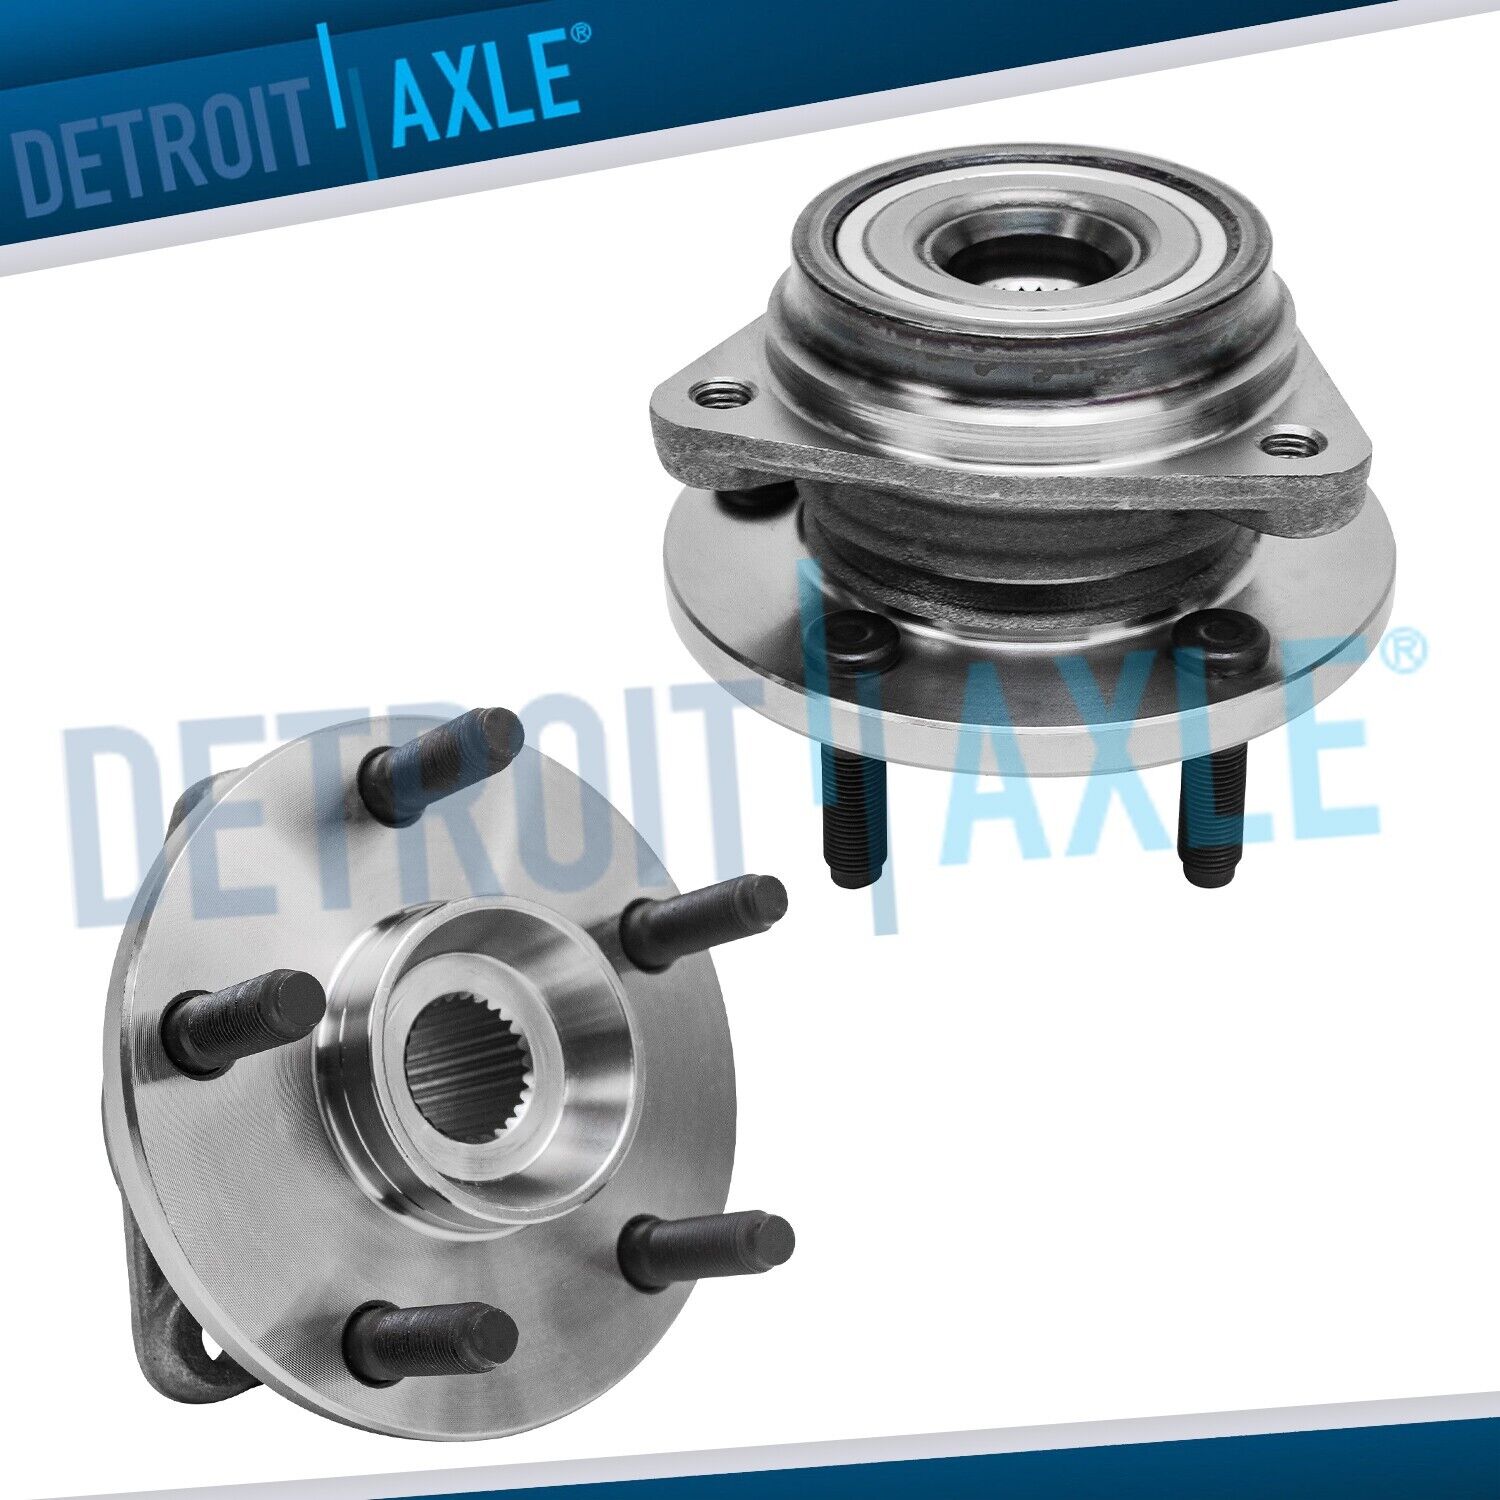 AWD Front Wheel Hub and Bearings Assembly for 1990 1991 1992-1997 Ford Aerostar